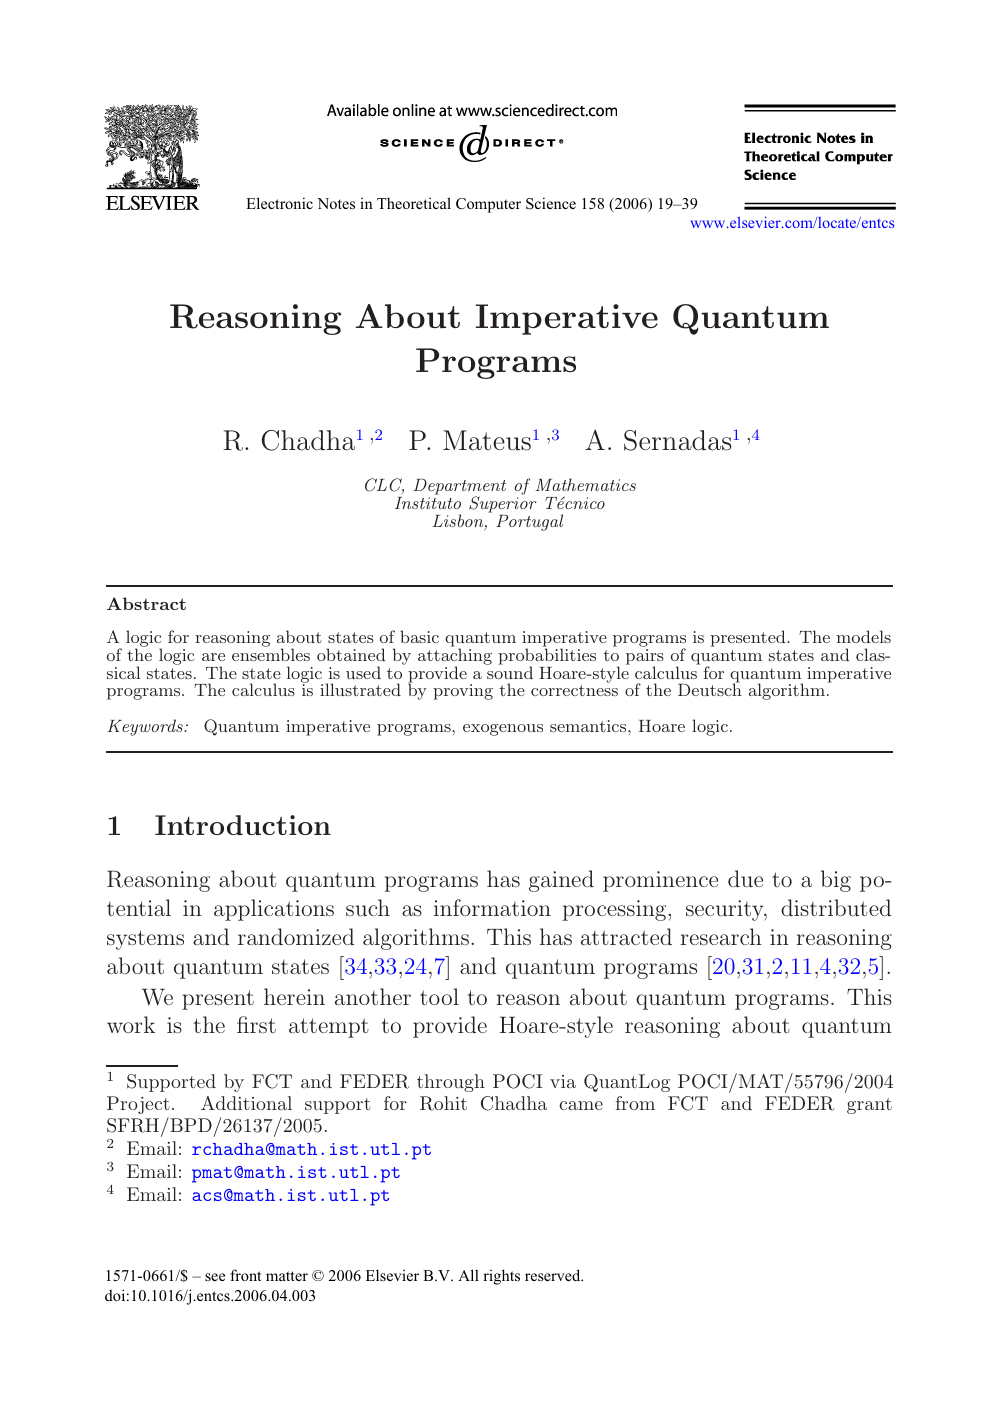 Reasoning About Imperative Quantum Programs Topic Of Research Paper In Computer And Information Sciences Download Scholarly Article Pdf And Read For Free On Cyberleninka Open Science Hub